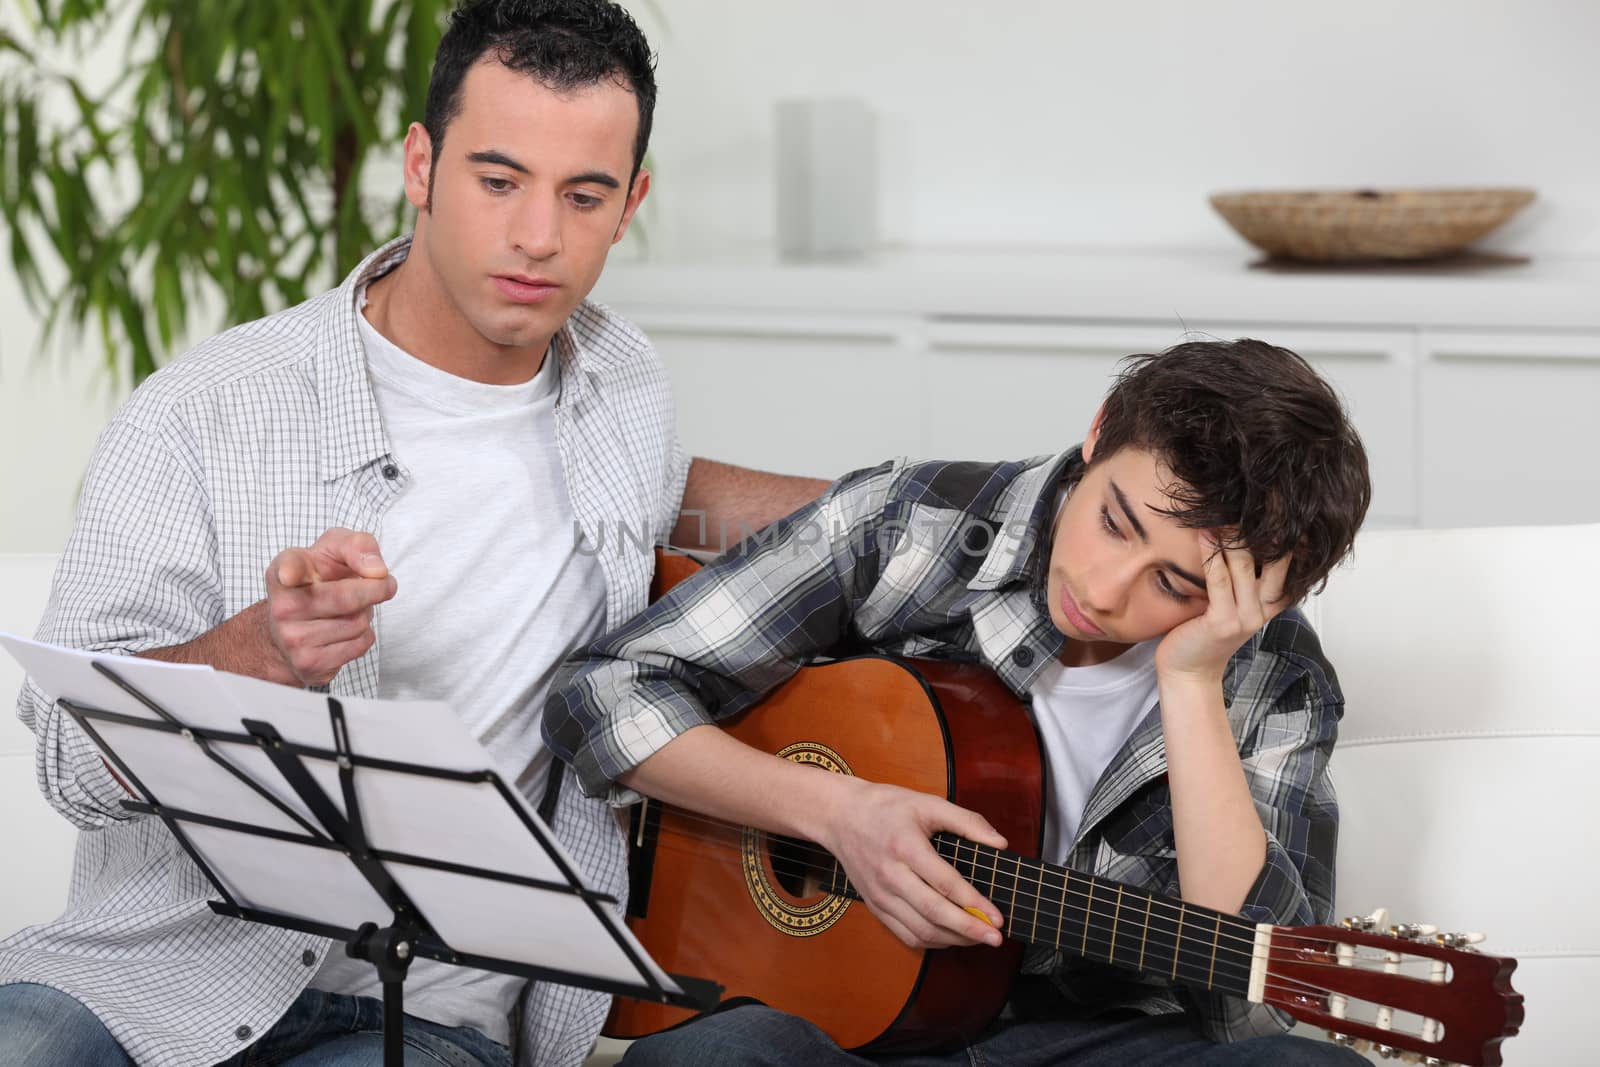 teenager having music lesson by phovoir